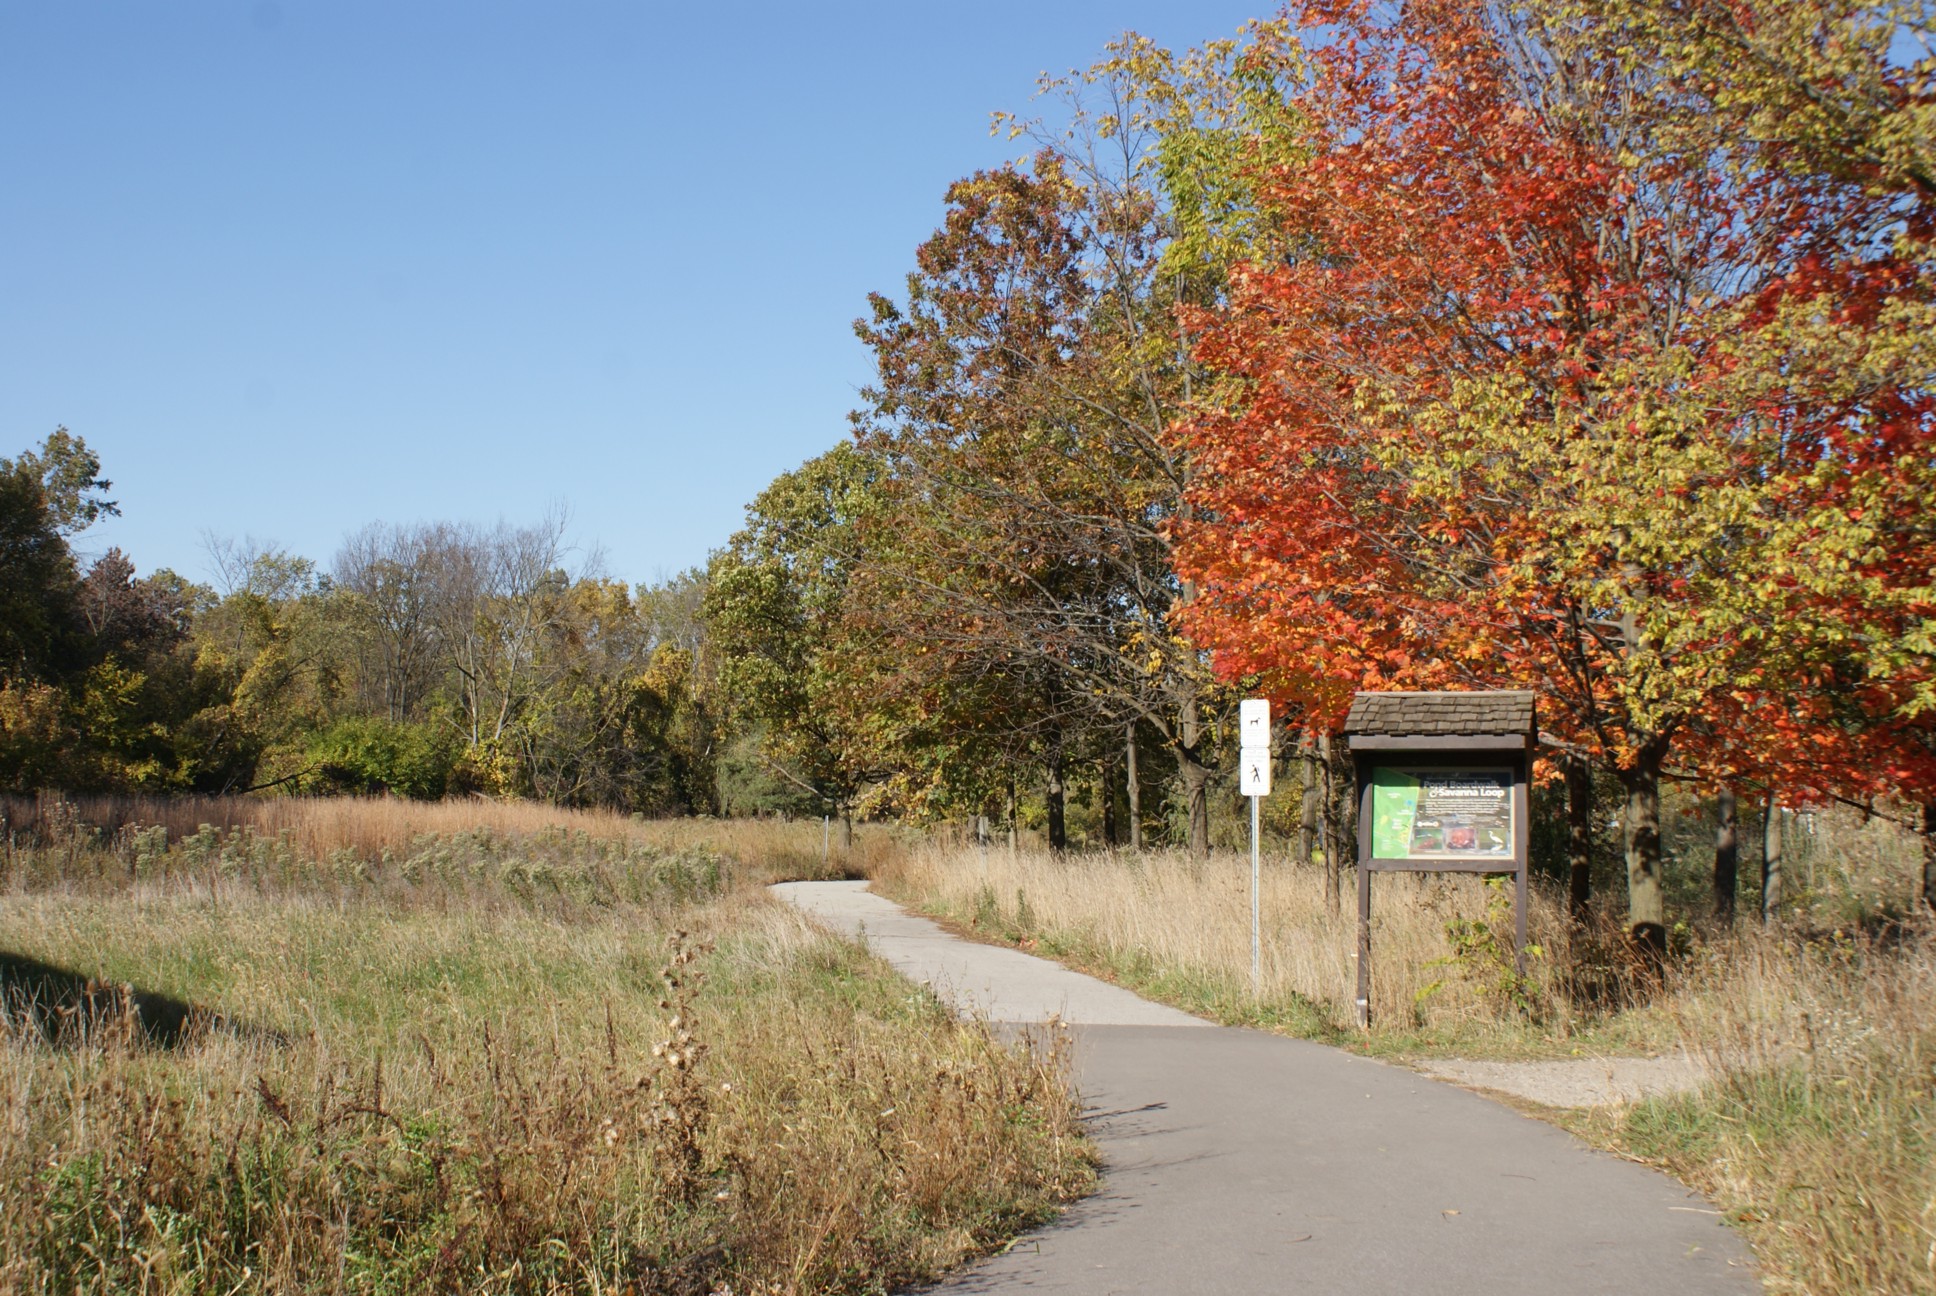 Ojibway nature area pathway in autumn